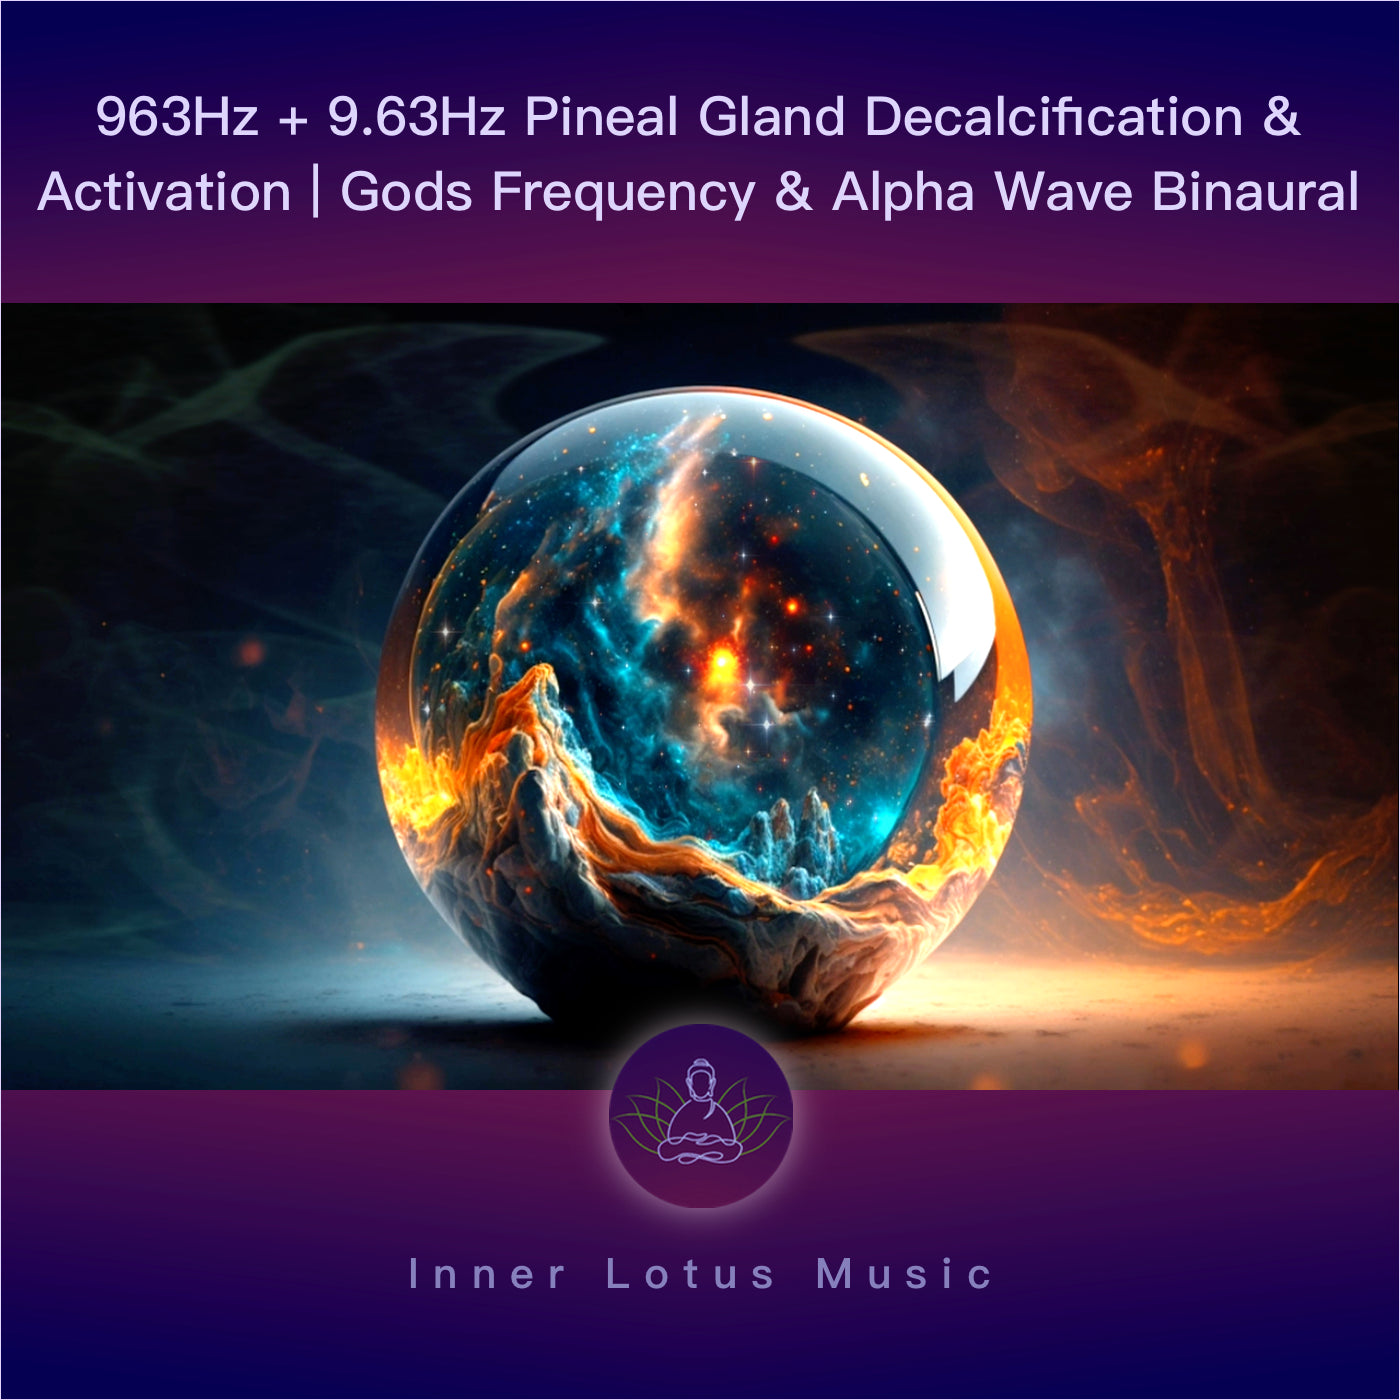 963Hz + 9.63Hz Pineal Gland Decalcification & Activation | Gods Frequency & Alpha Wave Binaural Beat